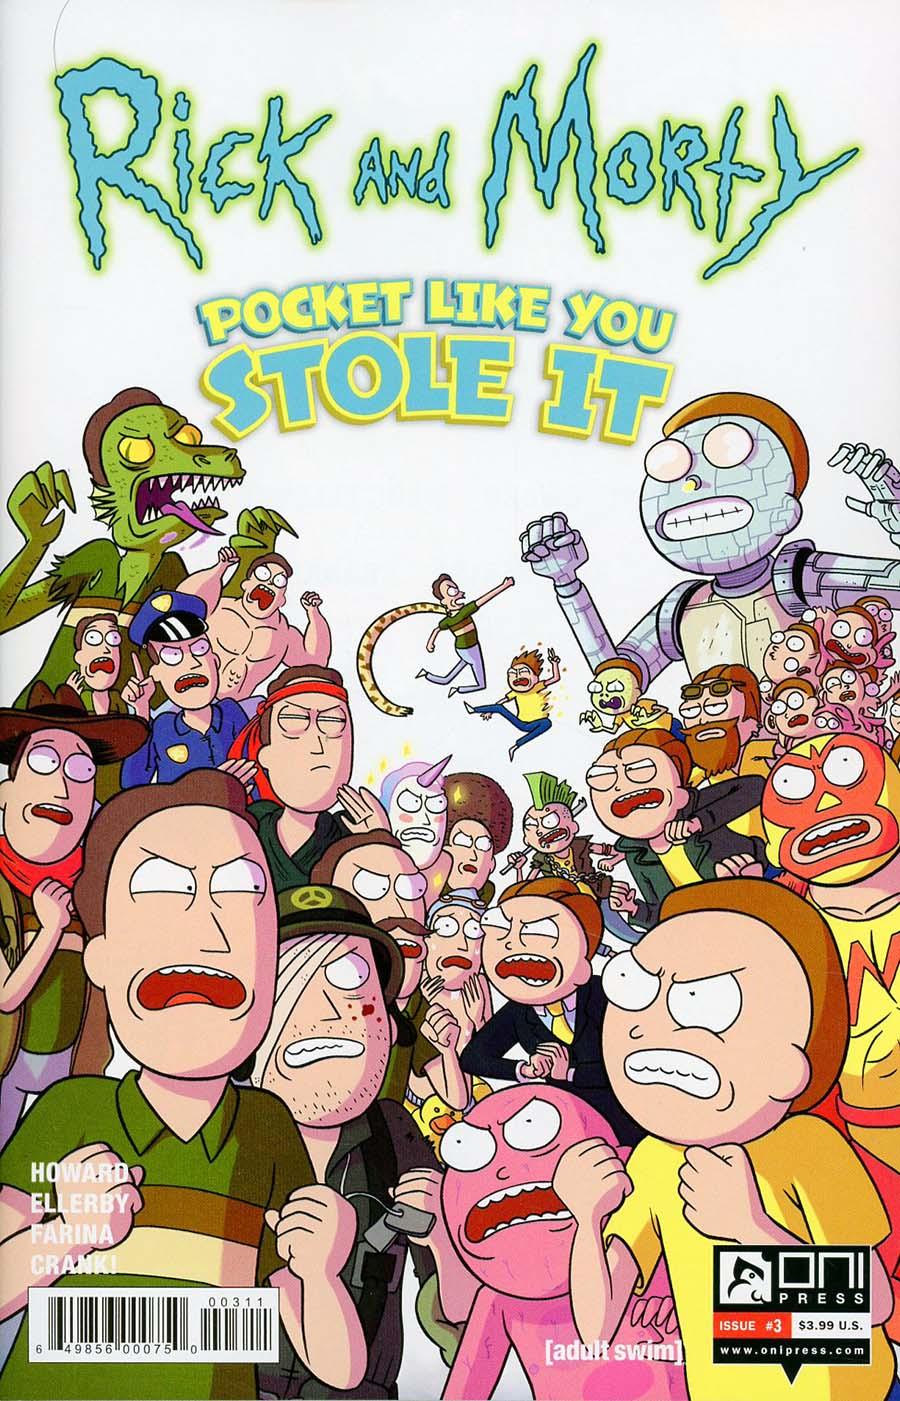 Rick And Morty Pocket Like You Stole It Vol. 1 #3